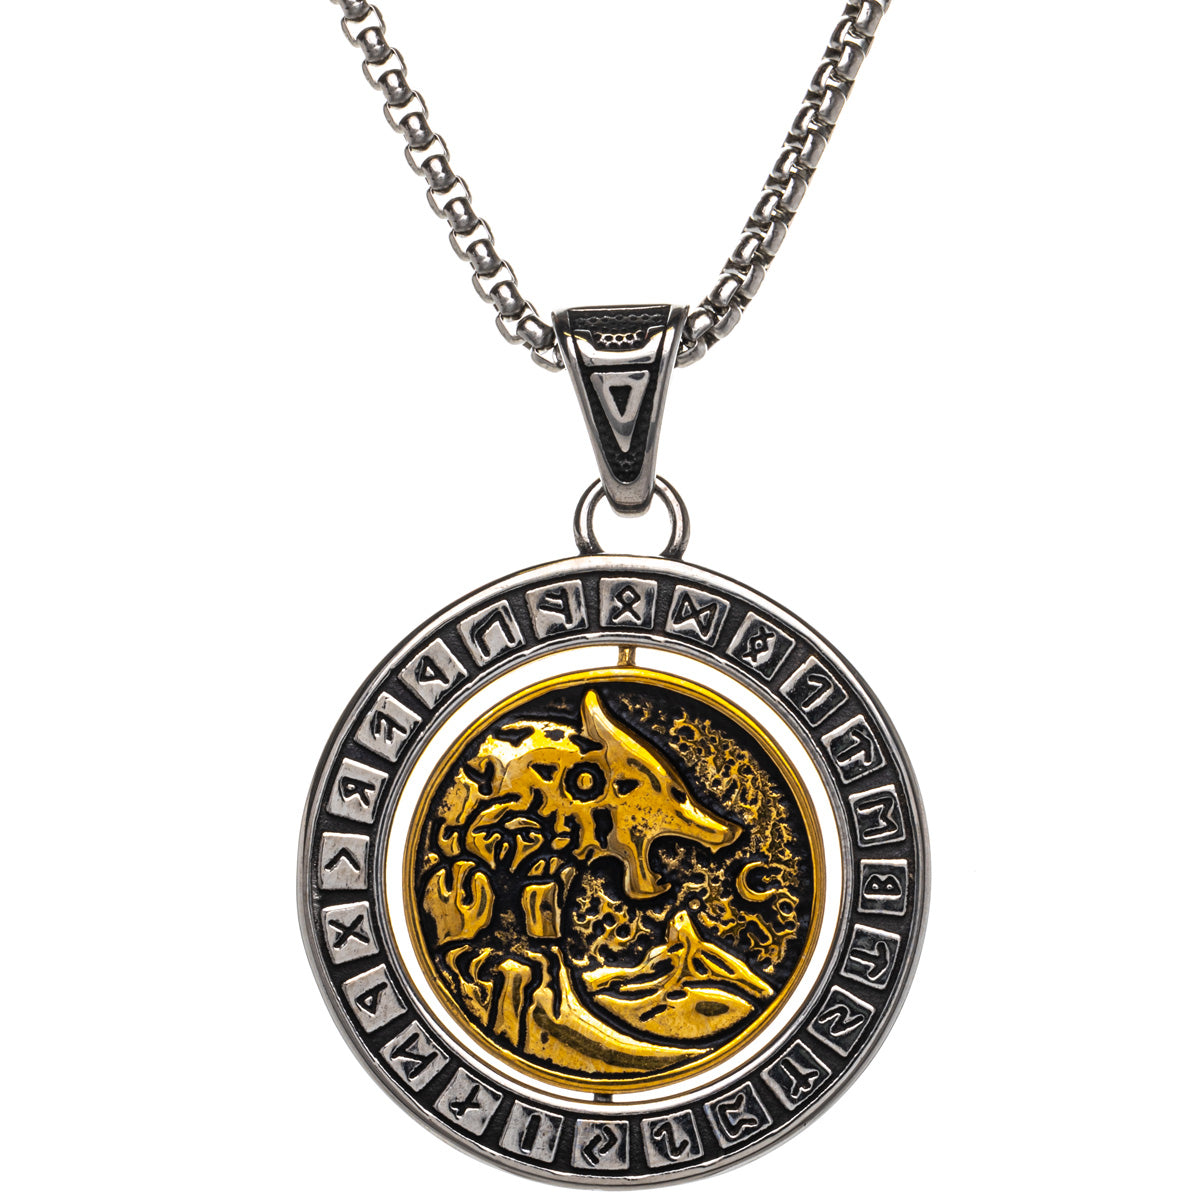 Rotating Fenrir wolf pendant necklace with pendants (Steel 316L)